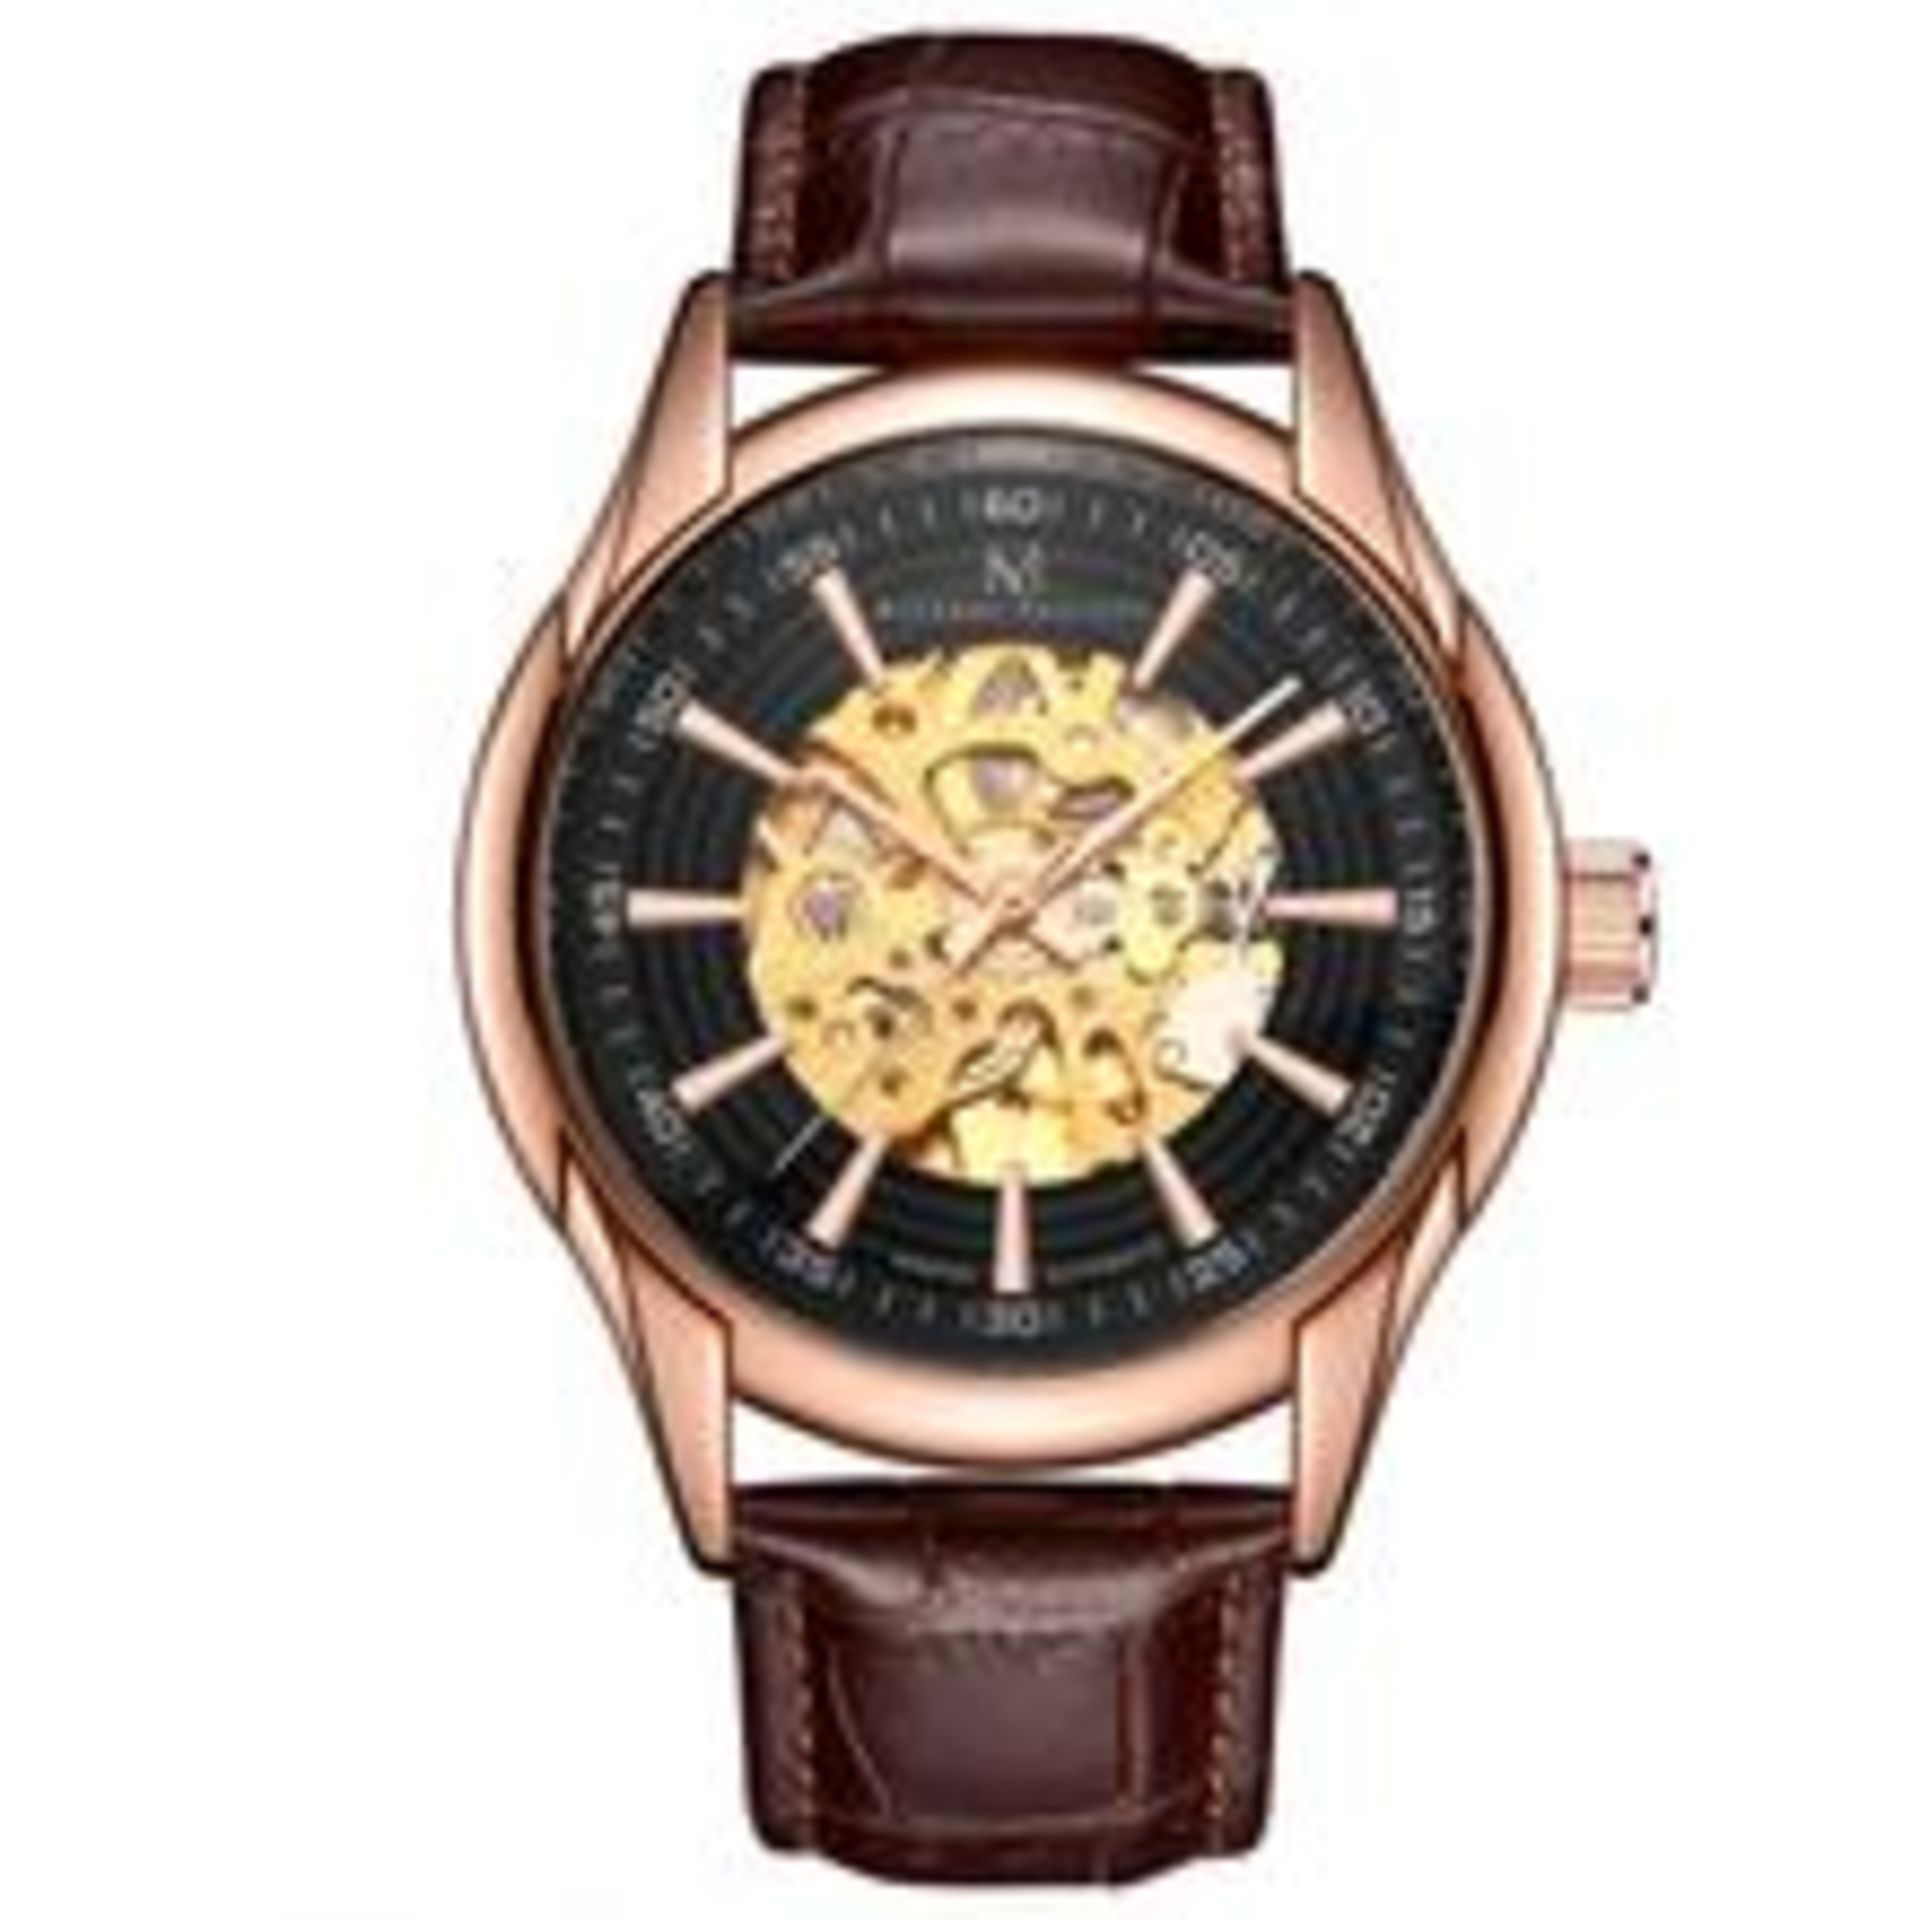 V Brand New Michael Philippe Gents Marvel Automatic Watch - ISP £239.99 (Michael Philippe)